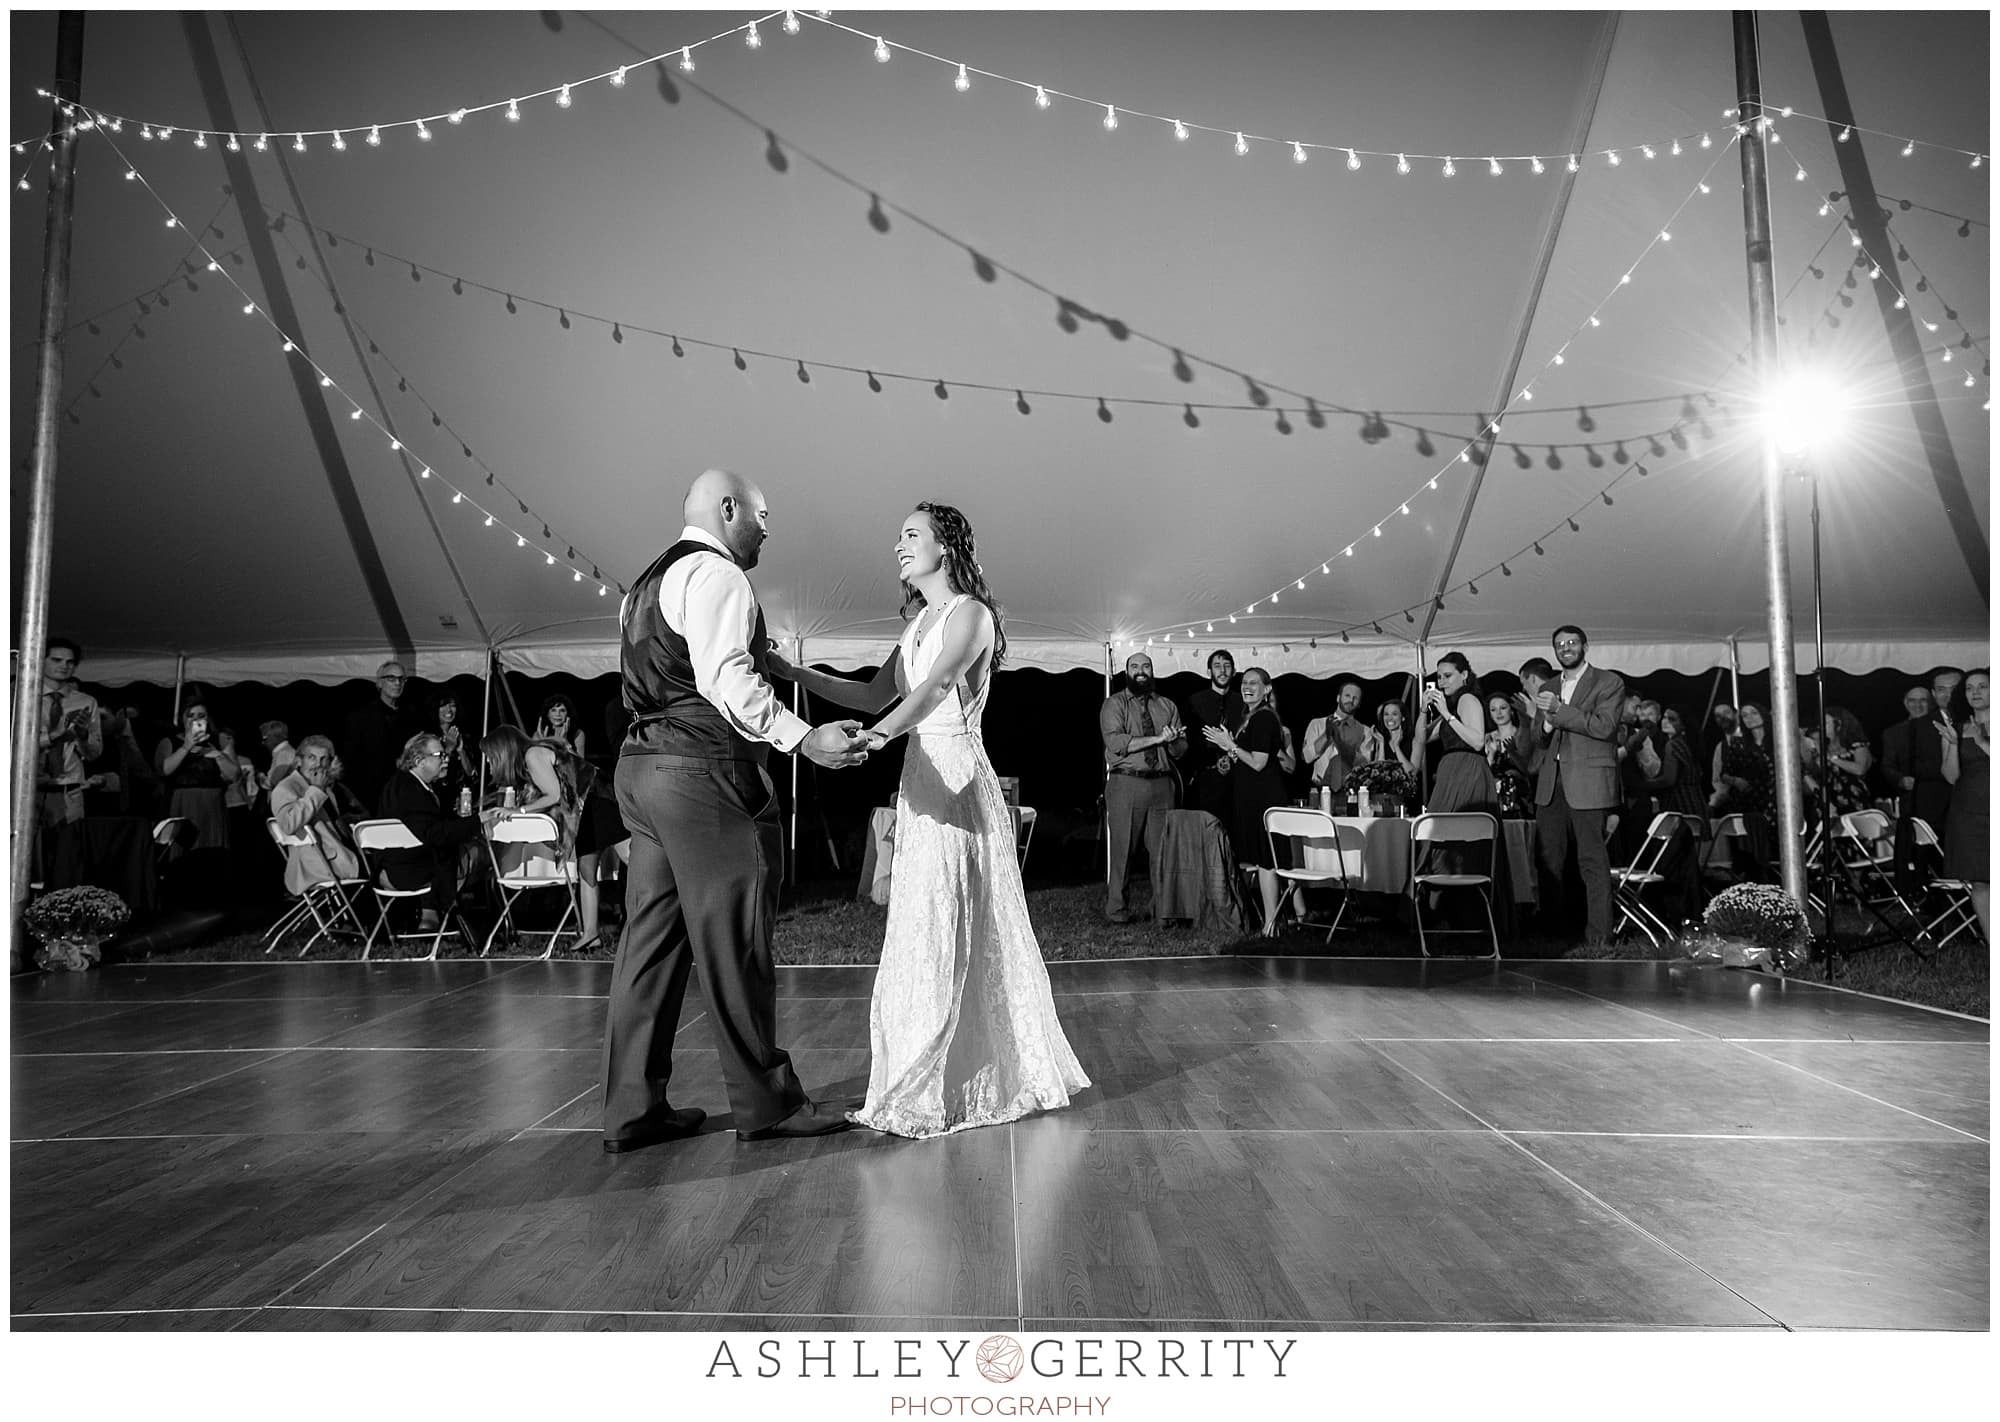 Bride & groom share their first dance.